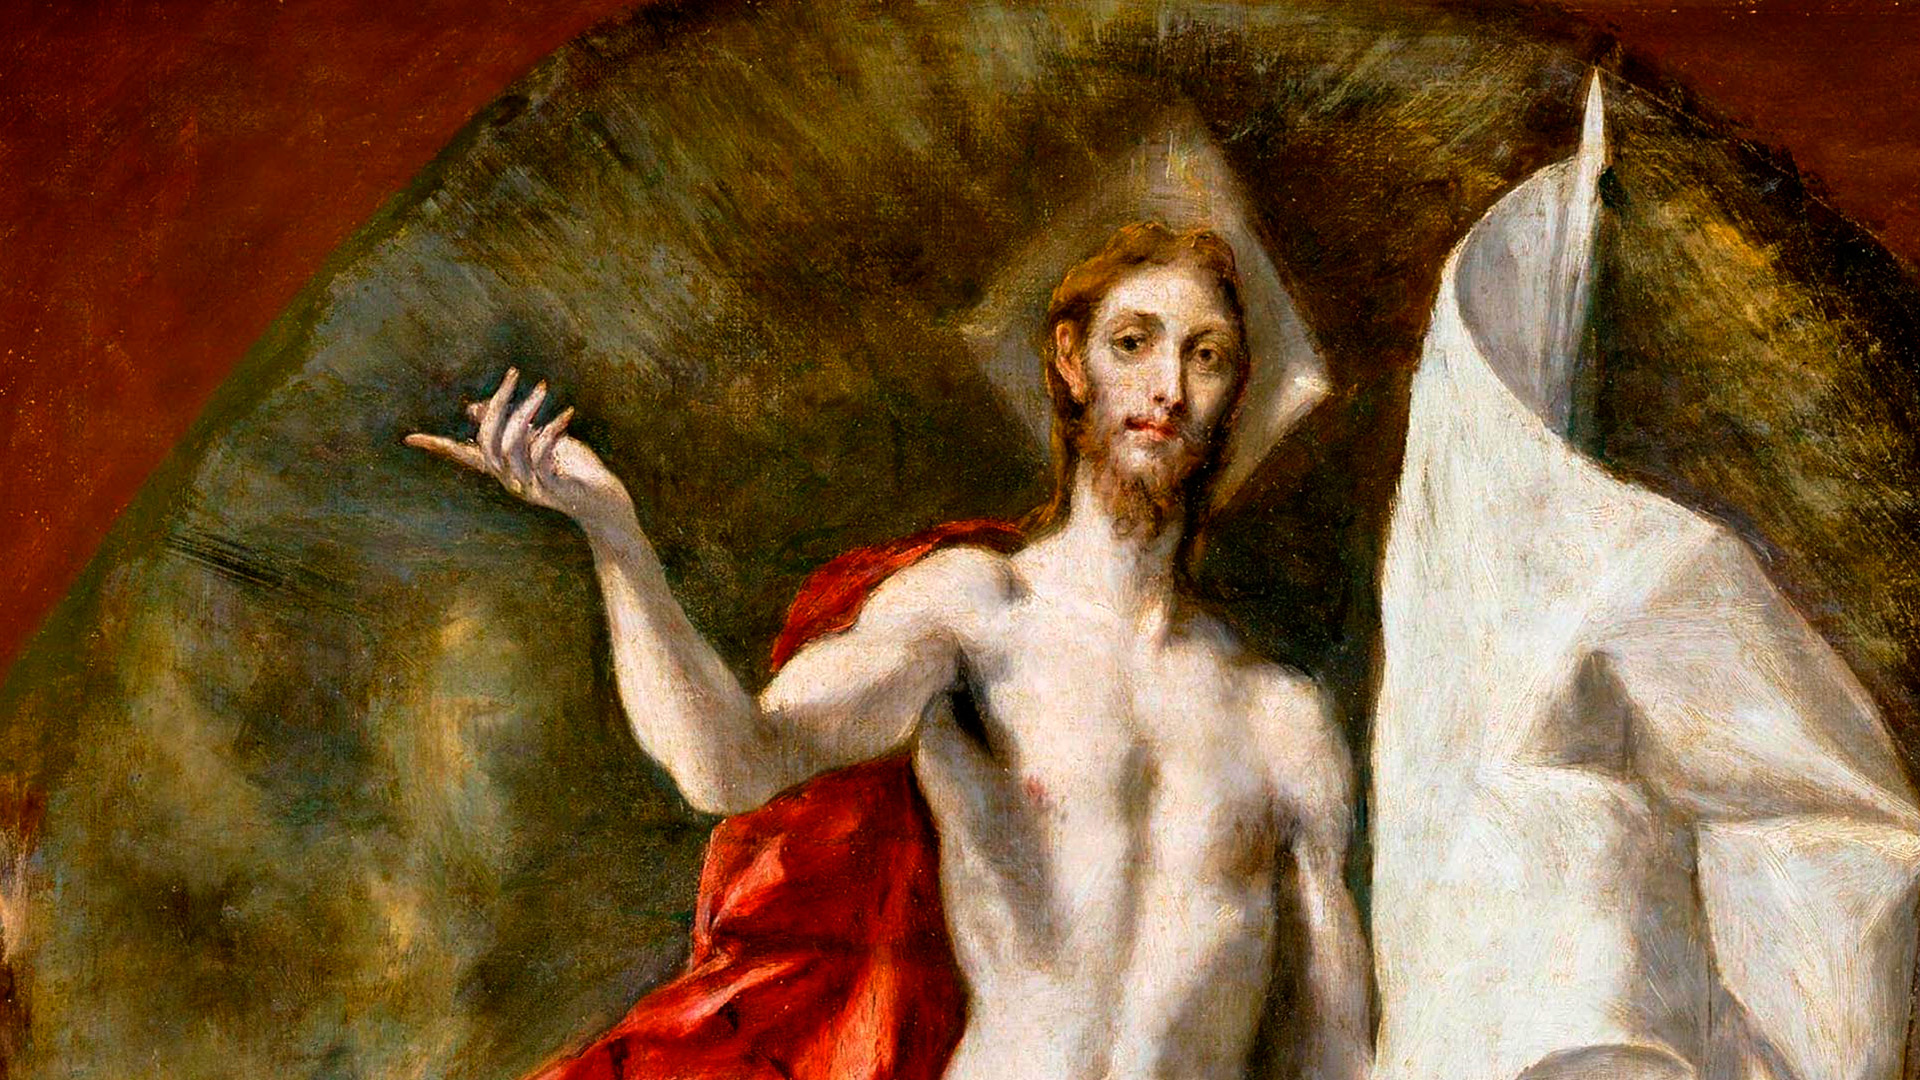 Detail of the risen Christ in a painting by El Greco